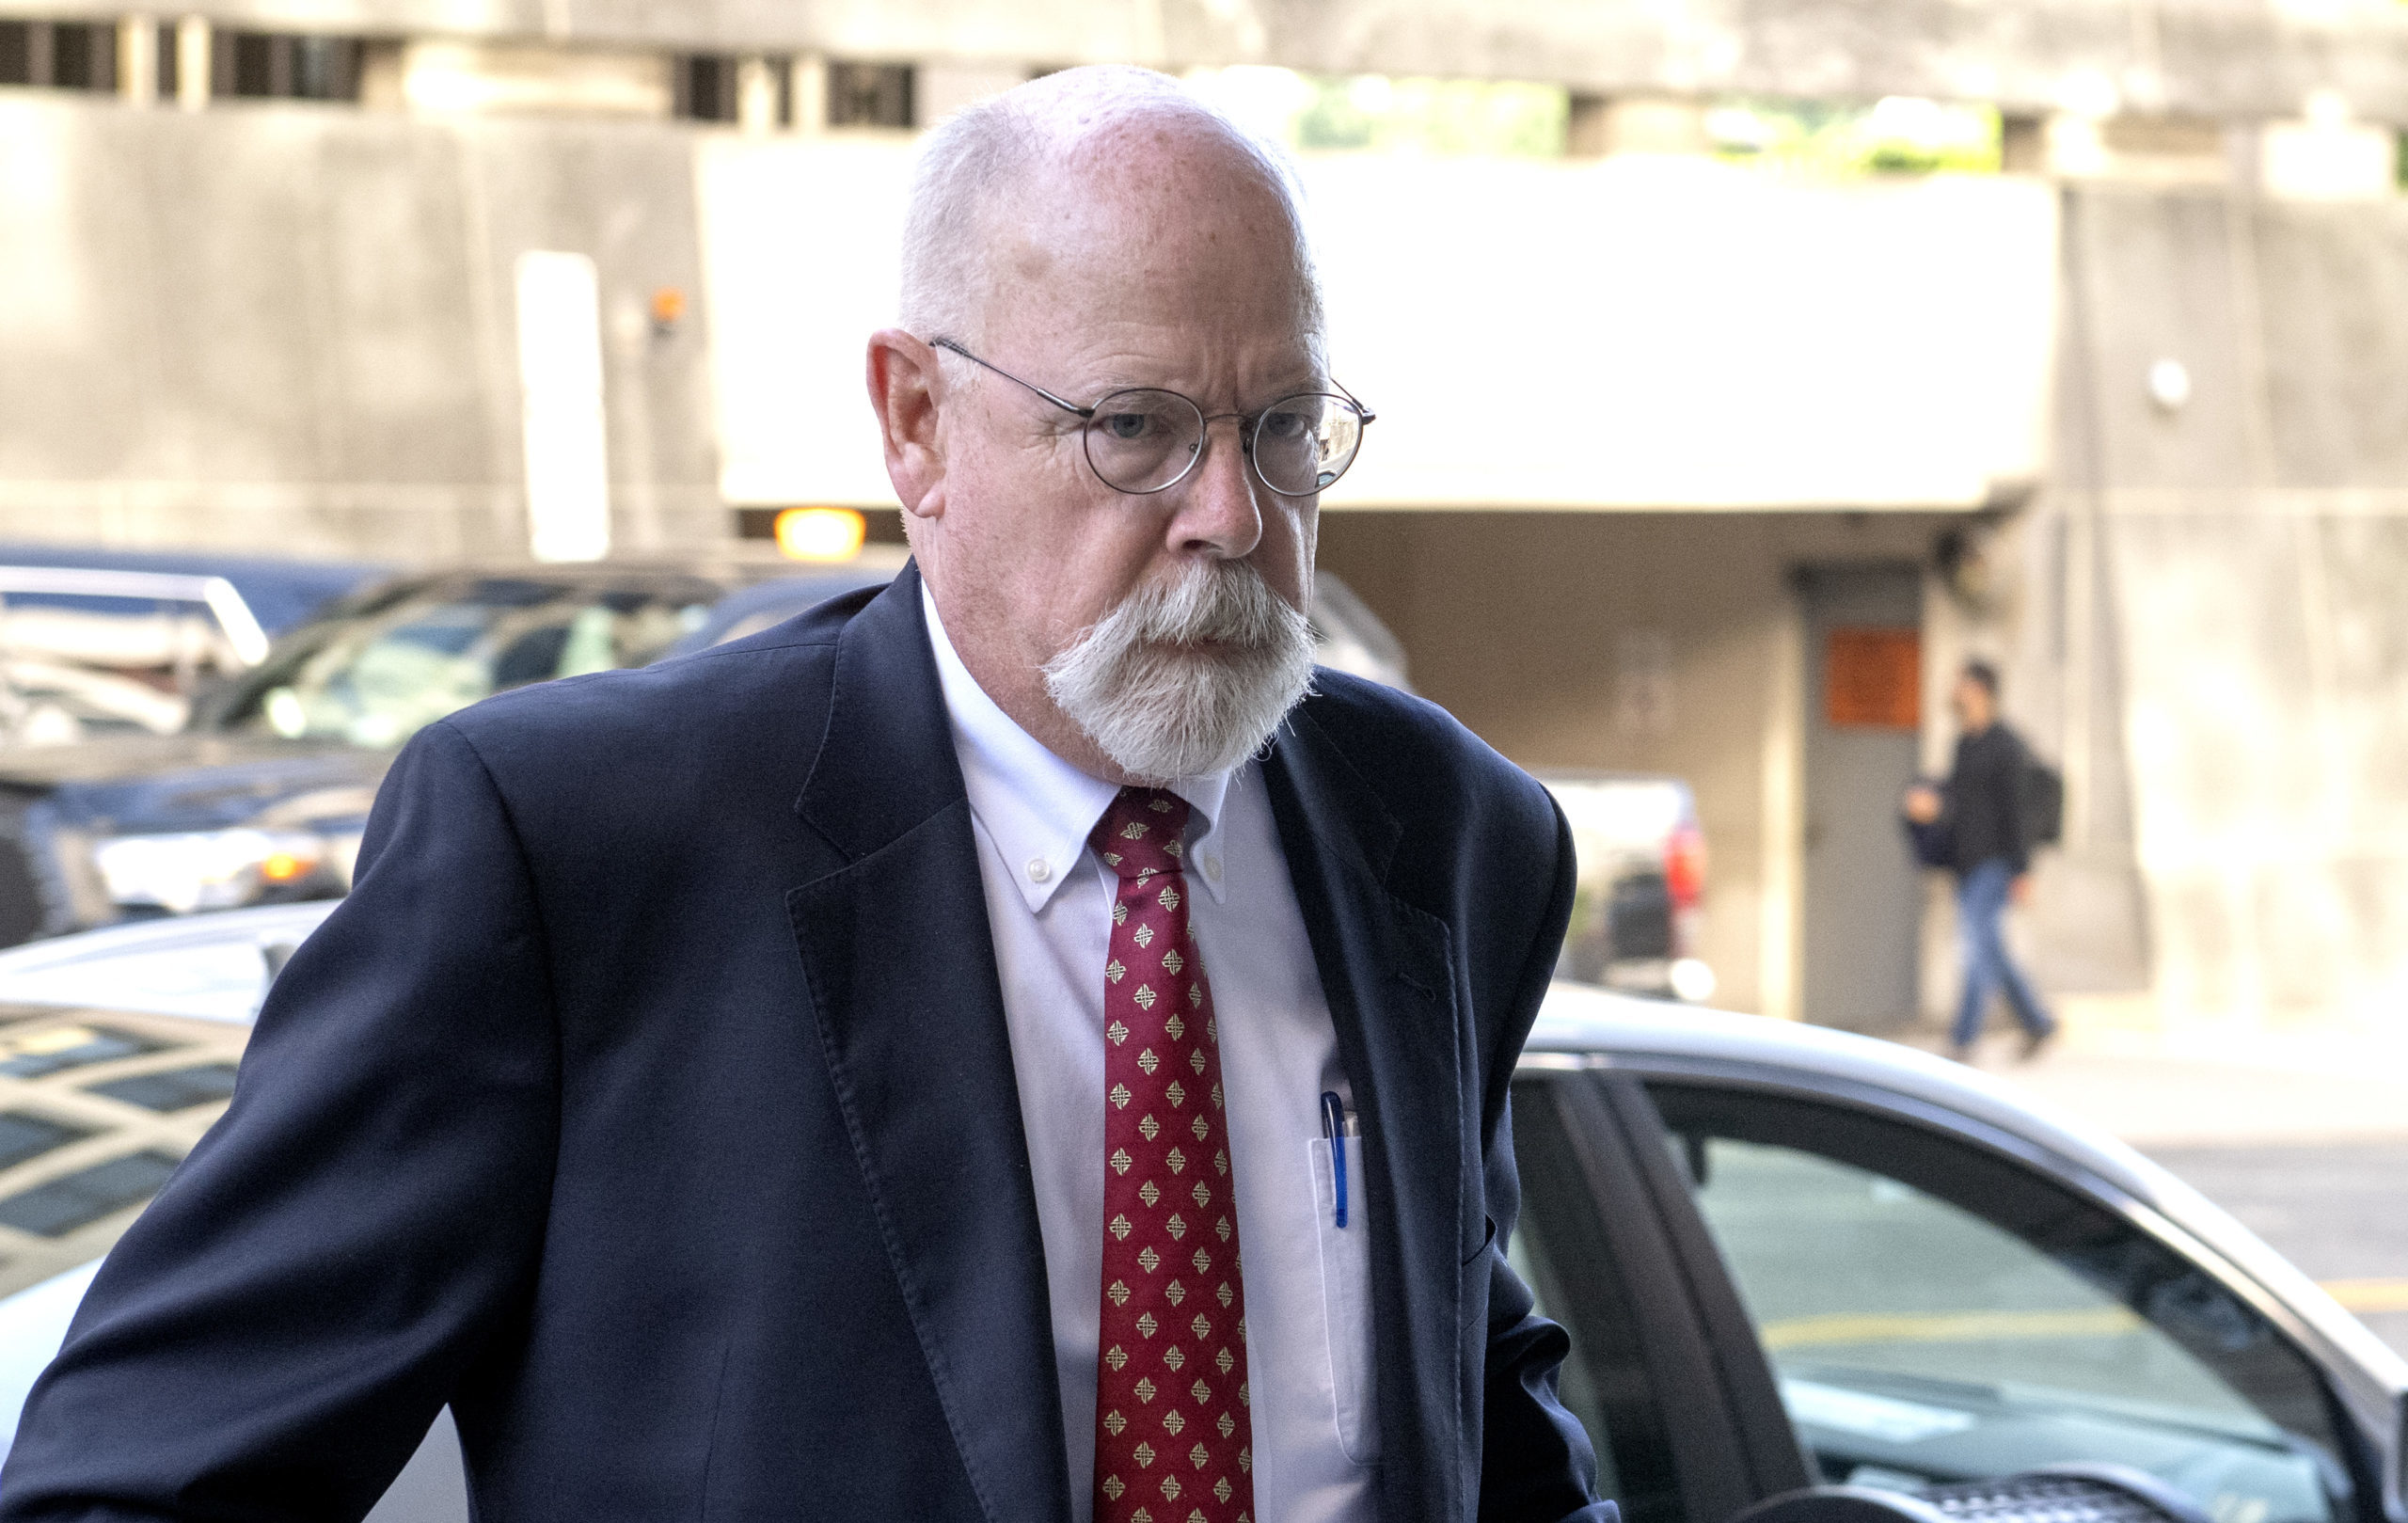 The Questions John Durham Didn’t Ask